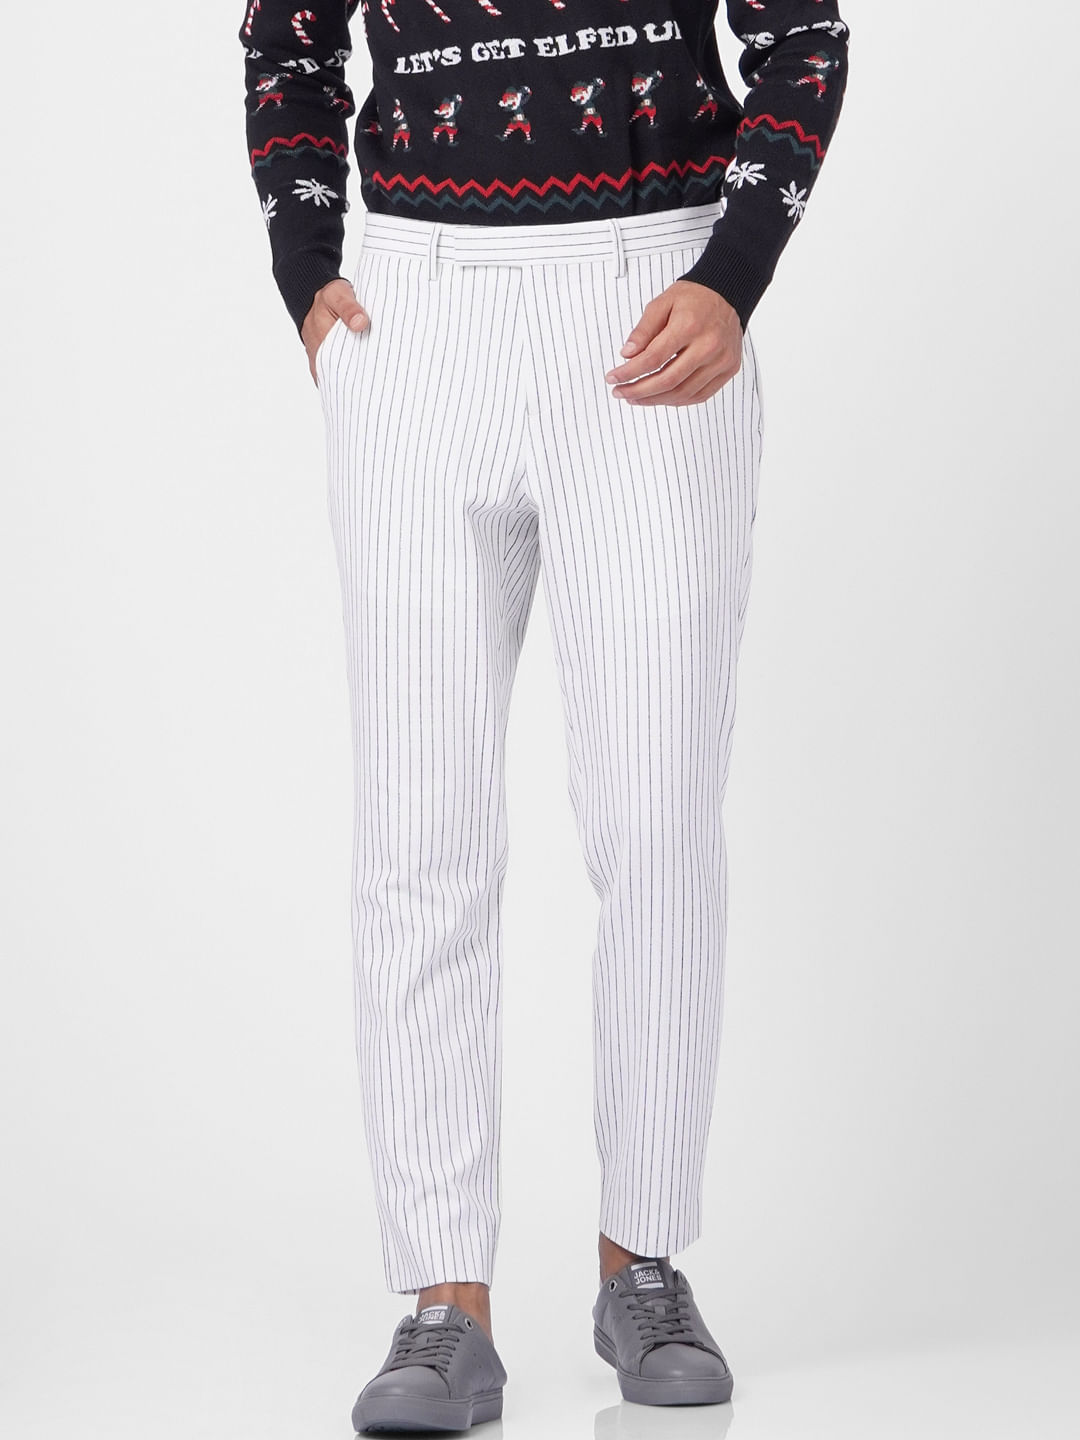 Buy online Black Striped Flat Front Casual Trouser from Bottom Wear for Men  by Livewire for 879 at 32 off  2023 Limeroadcom